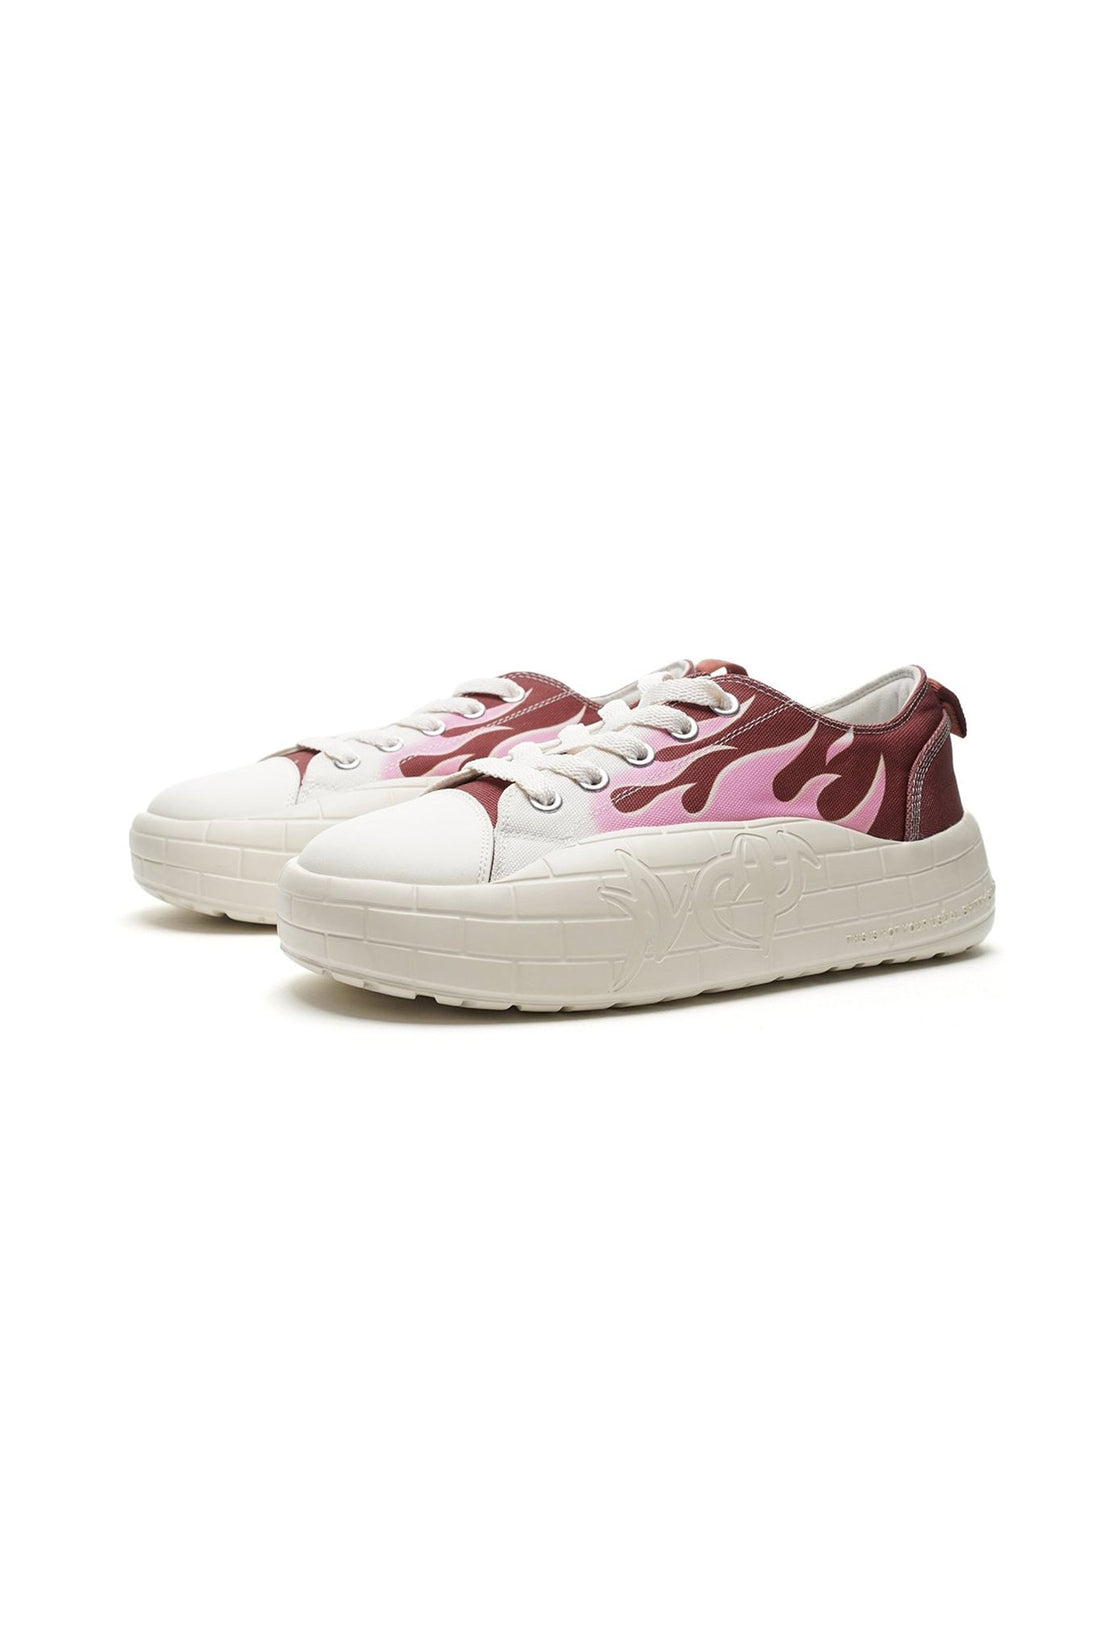 NYU VULC BROWN PINK Acupuncture